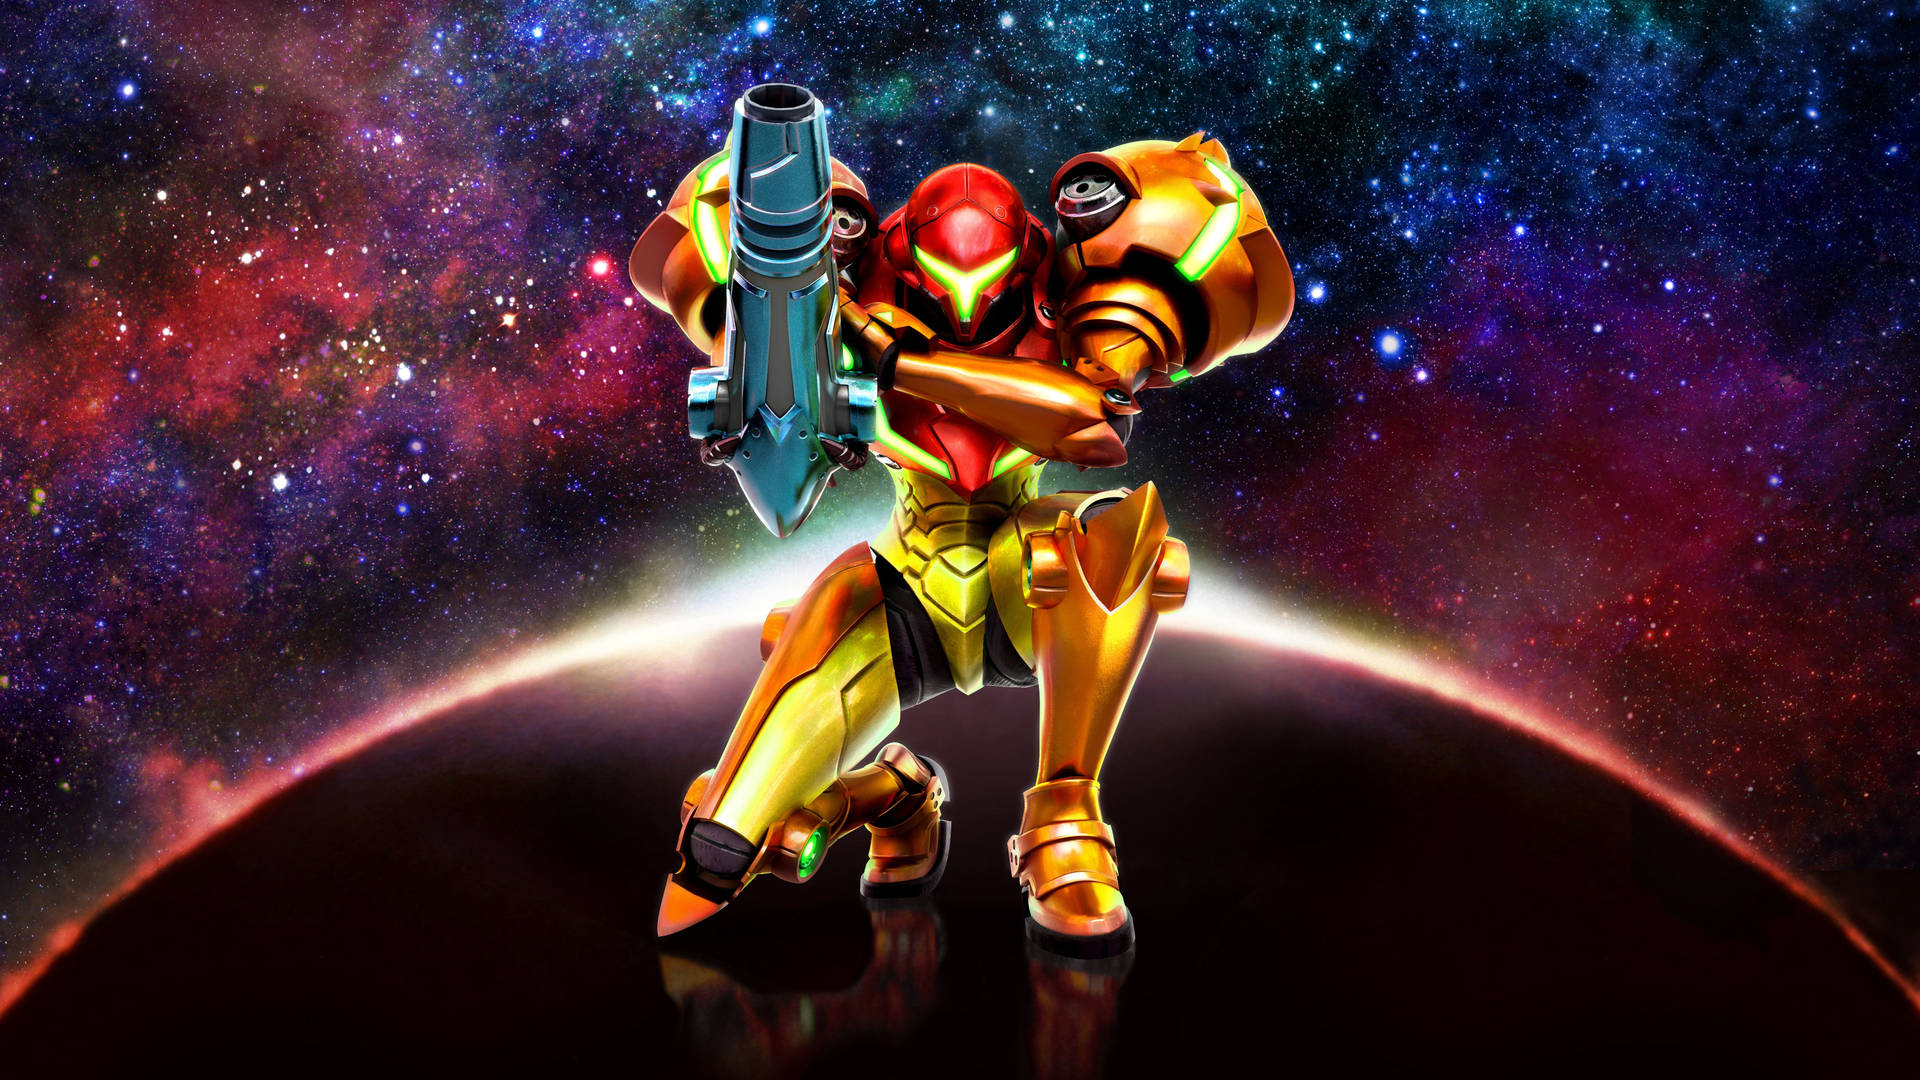 6137X3452 Metroid Wallpaper and Background